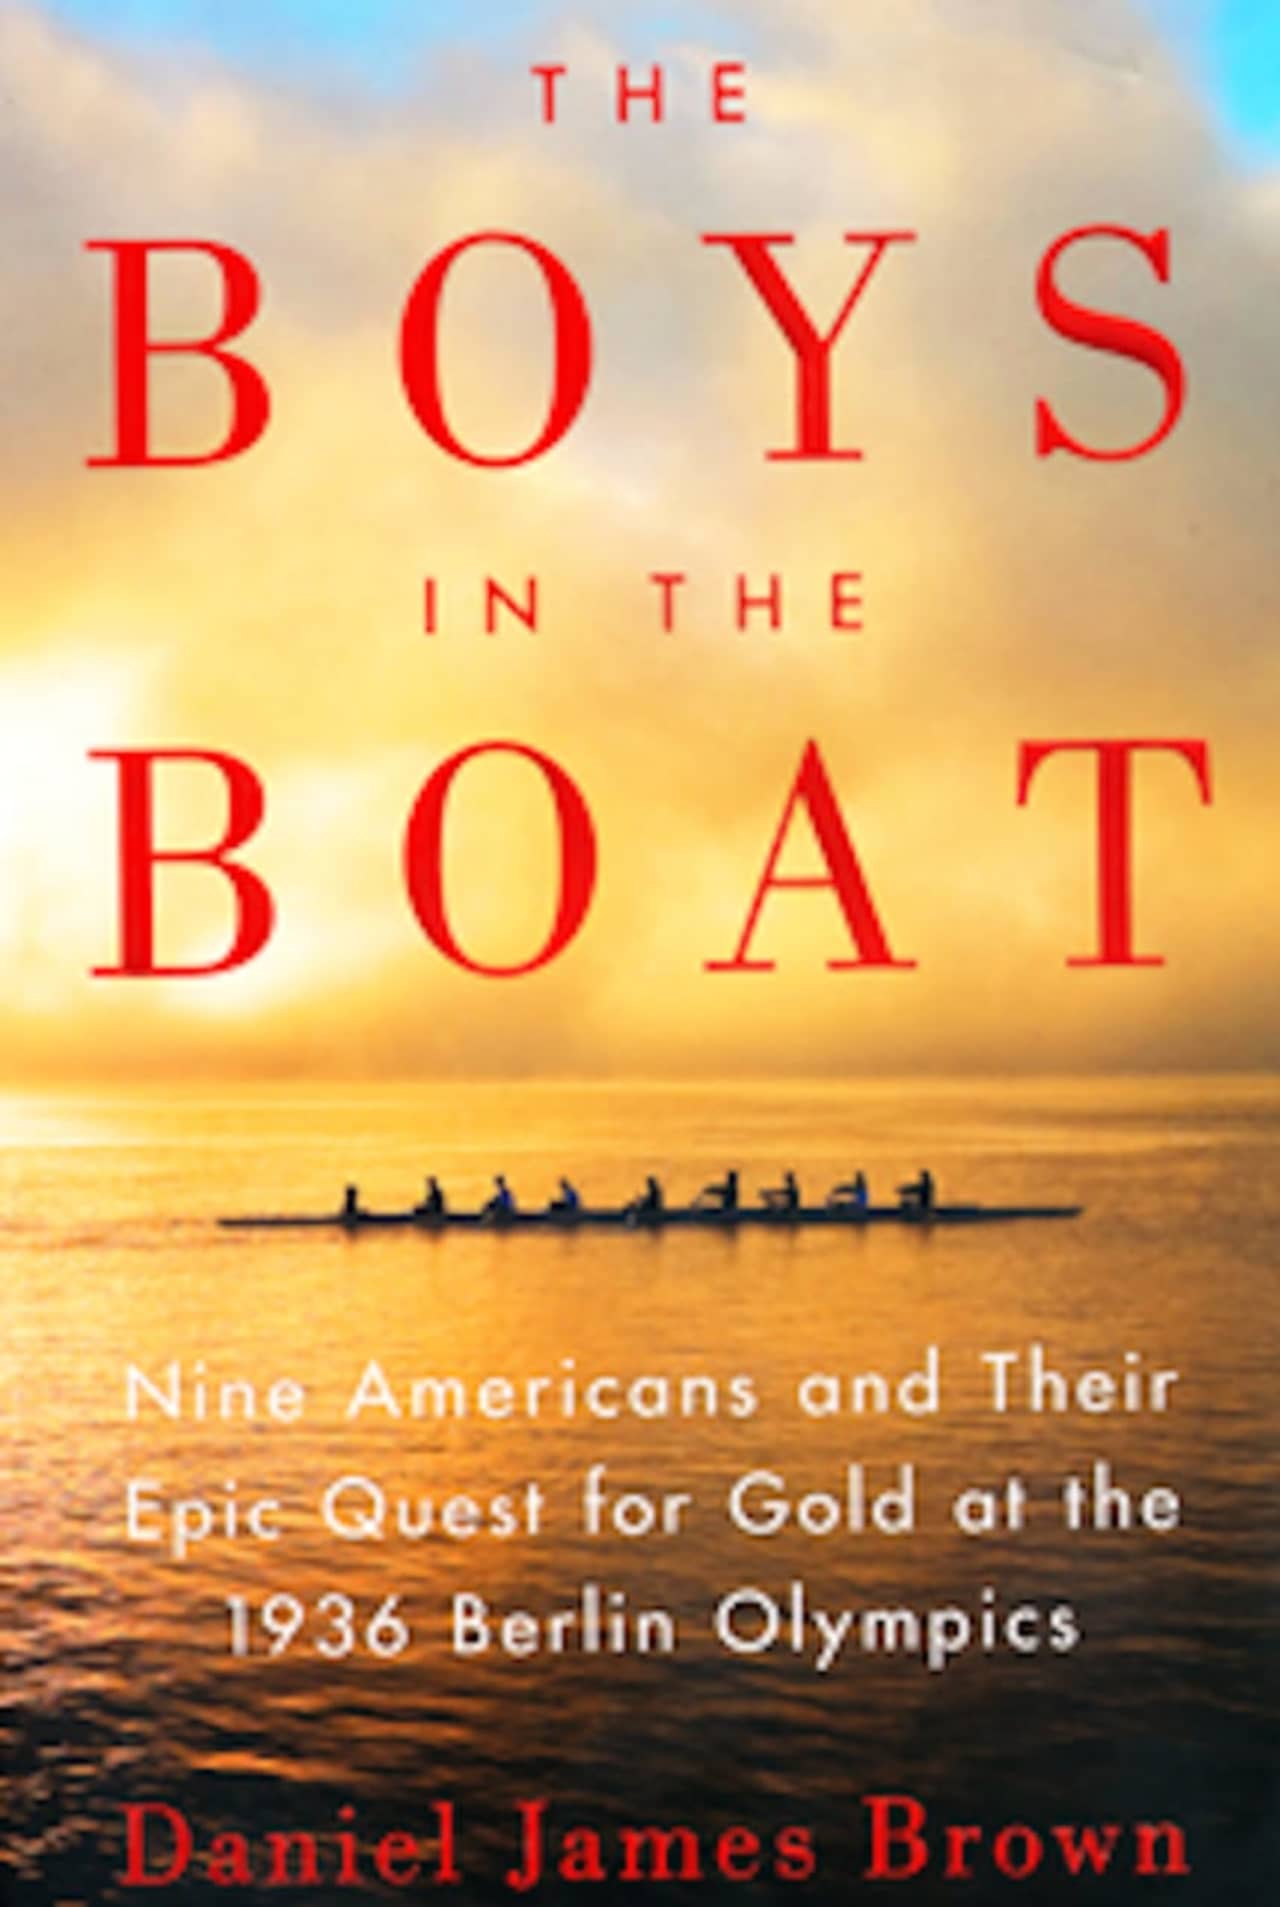 "The Boys in the Boat" by Daniel James Brown will be discussed at the next Monroe Reads Together event.